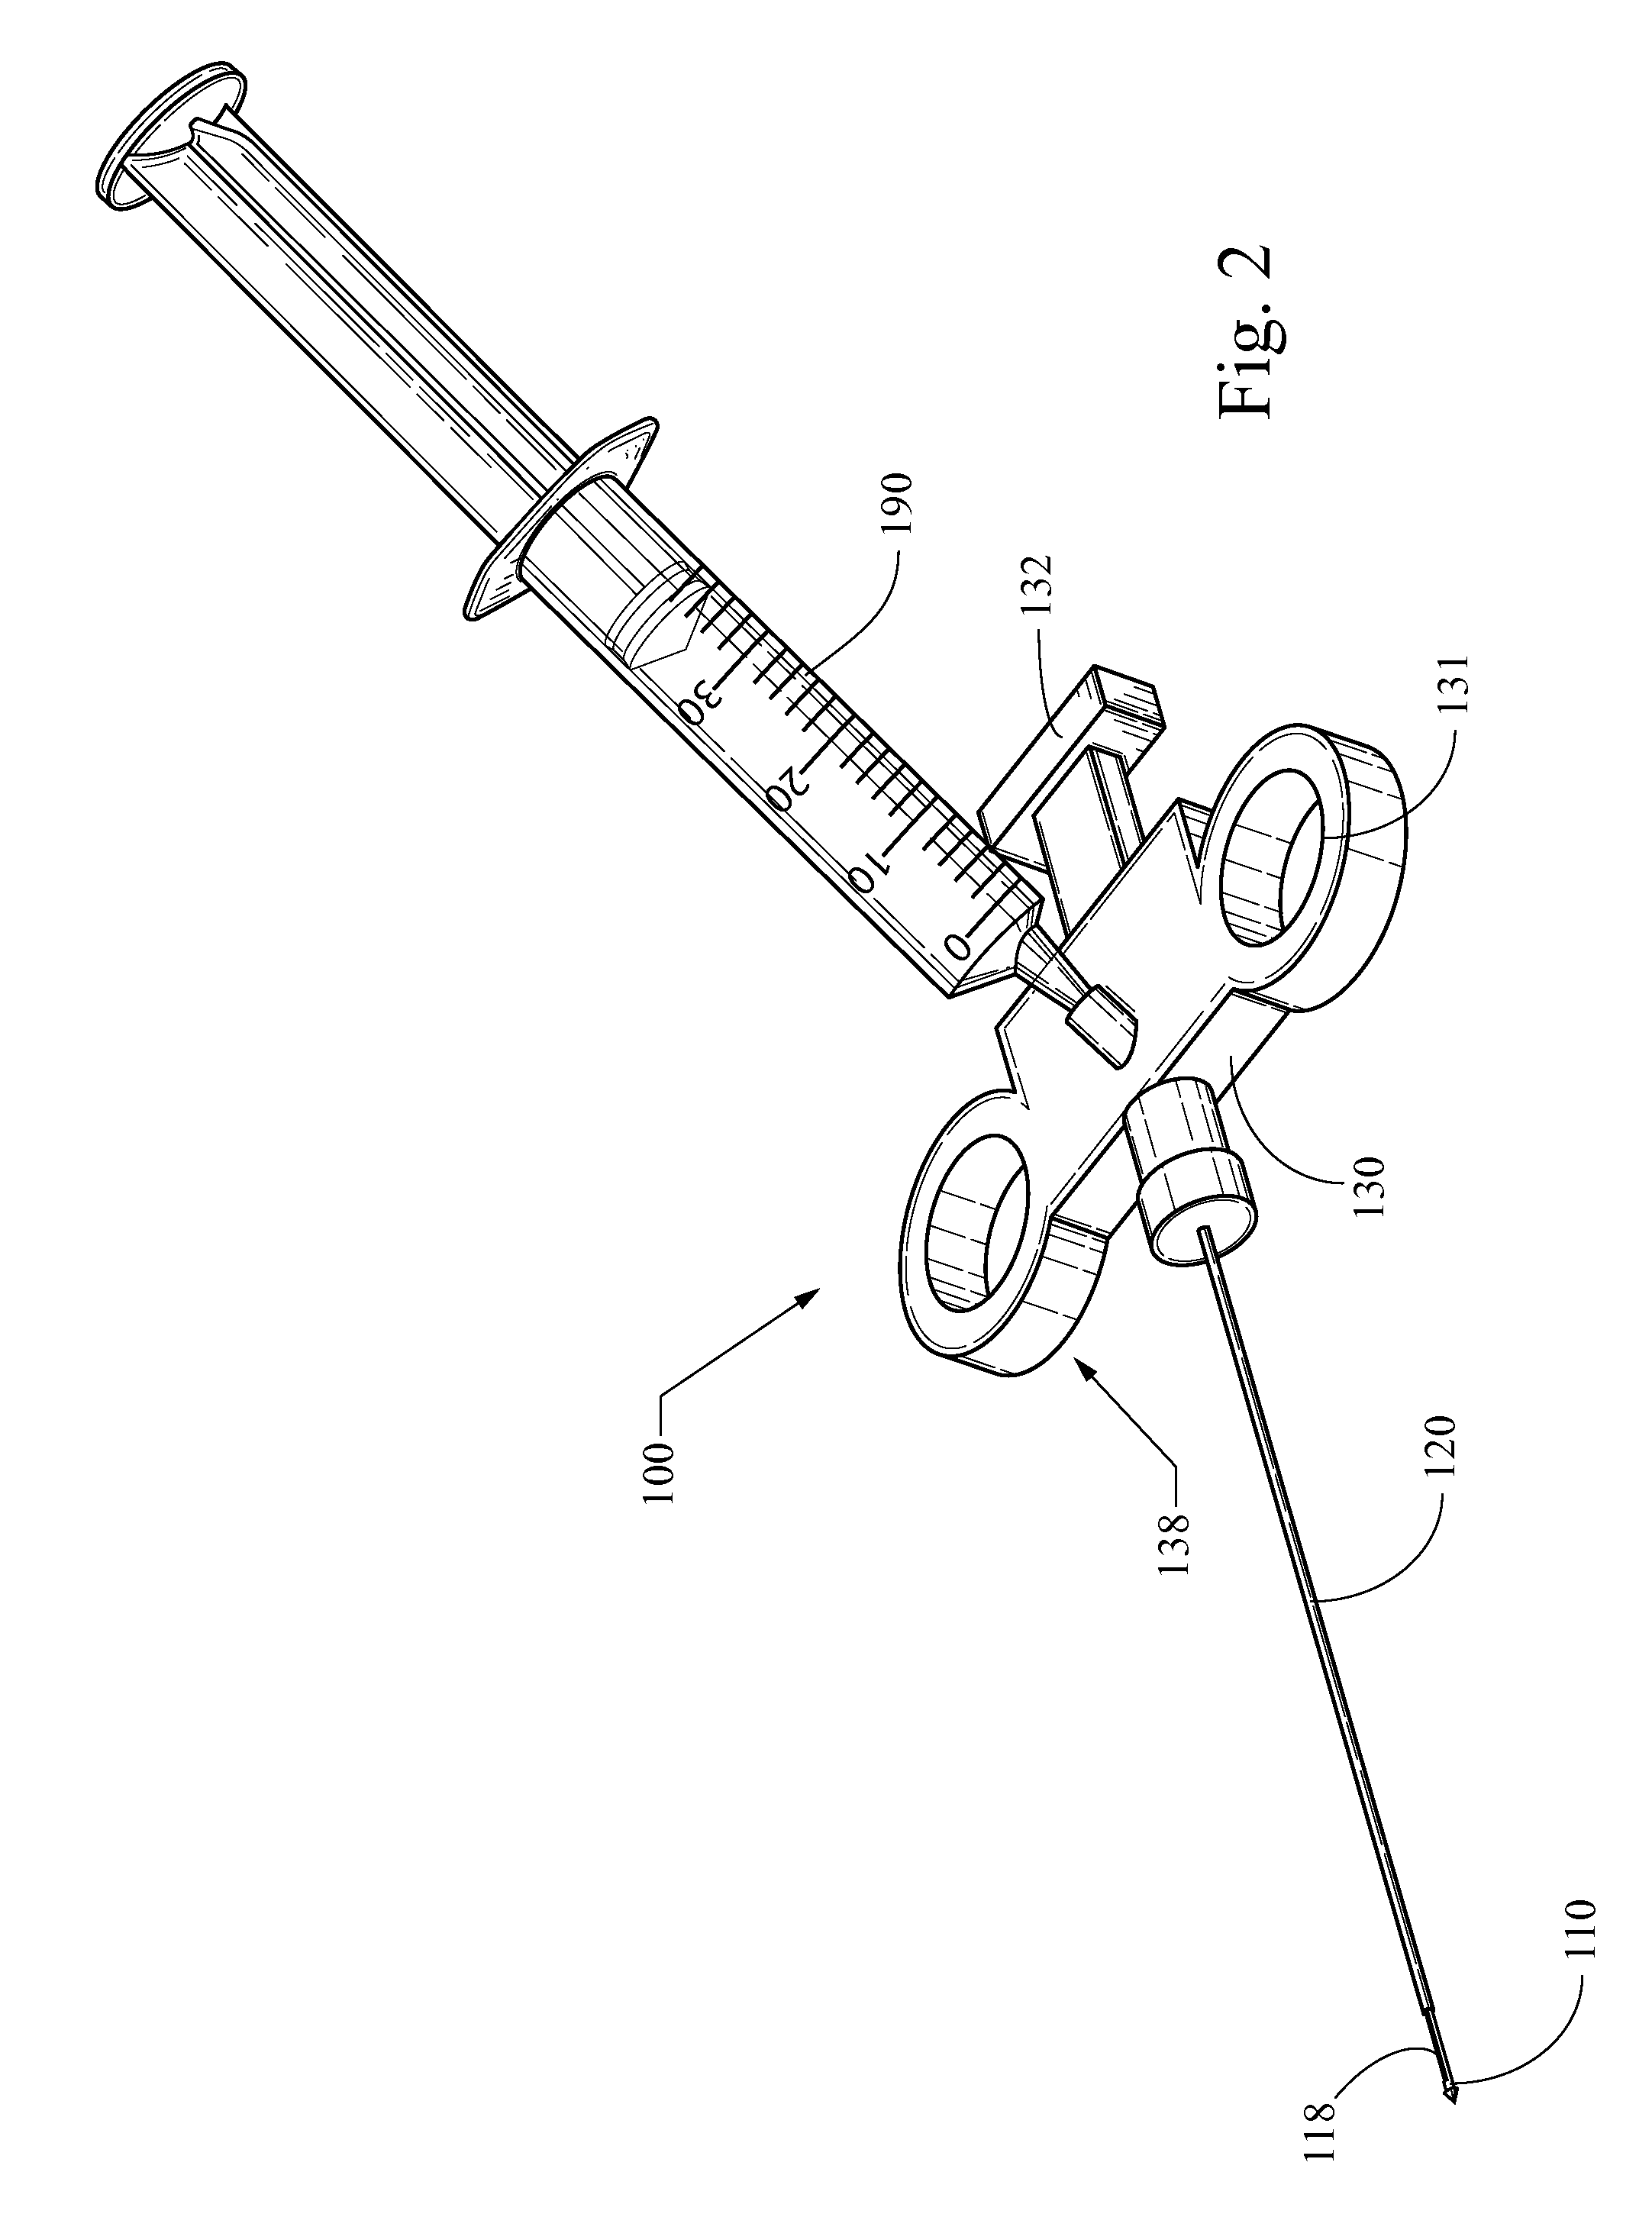 Biopsy needle with vacuum assist